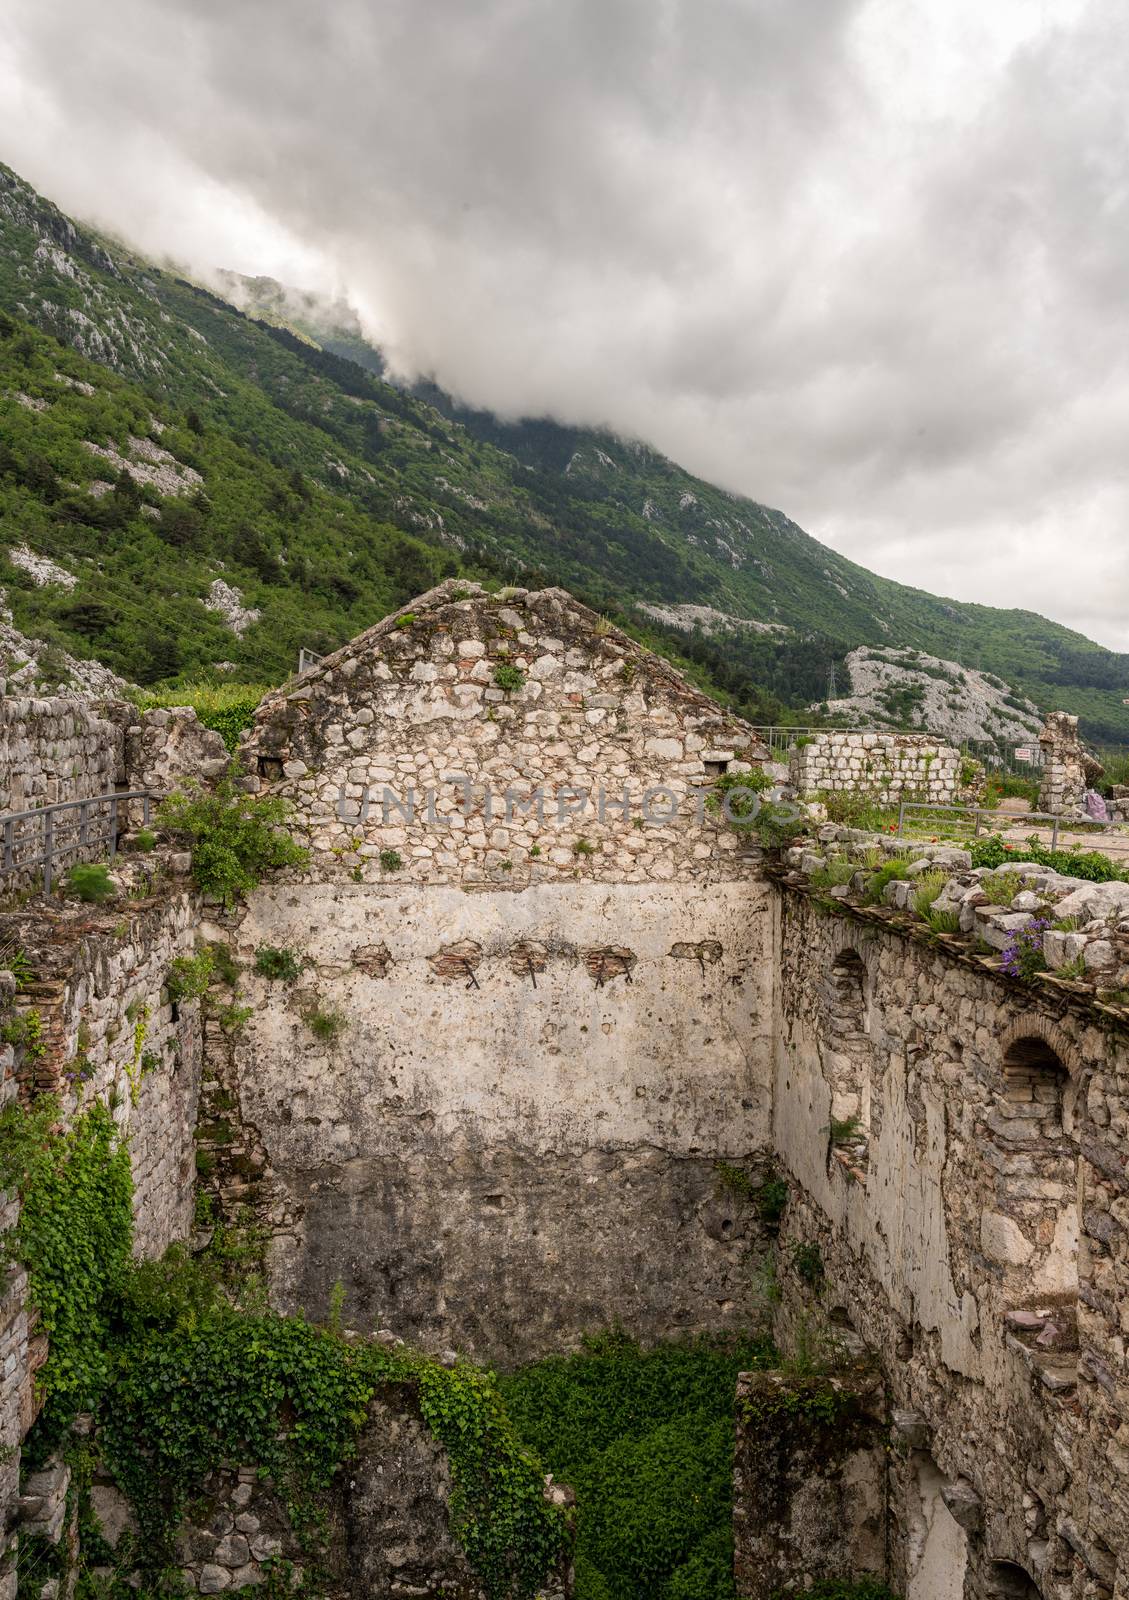 Kotor Fortress on mountainside above old town in Montenegro by steheap